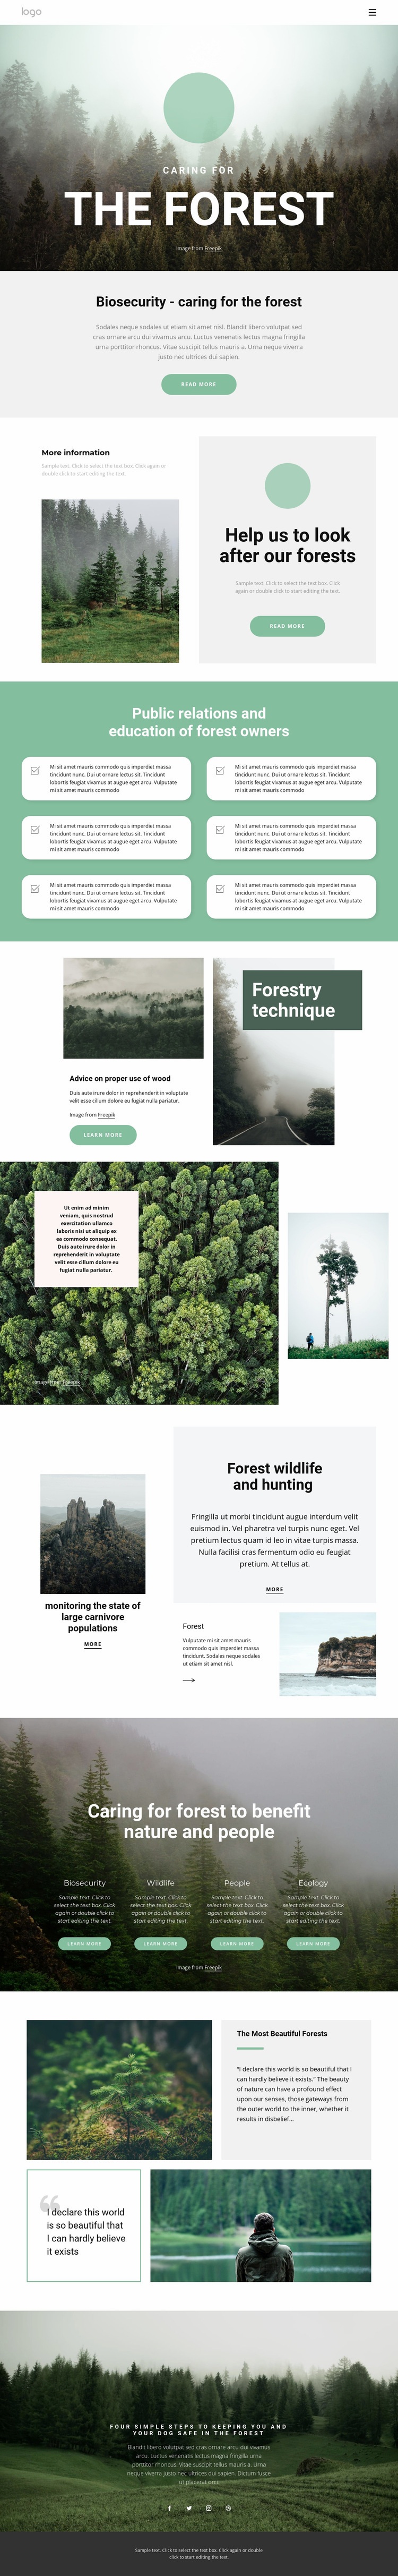 Caring for parks and forests Wix Template Alternative